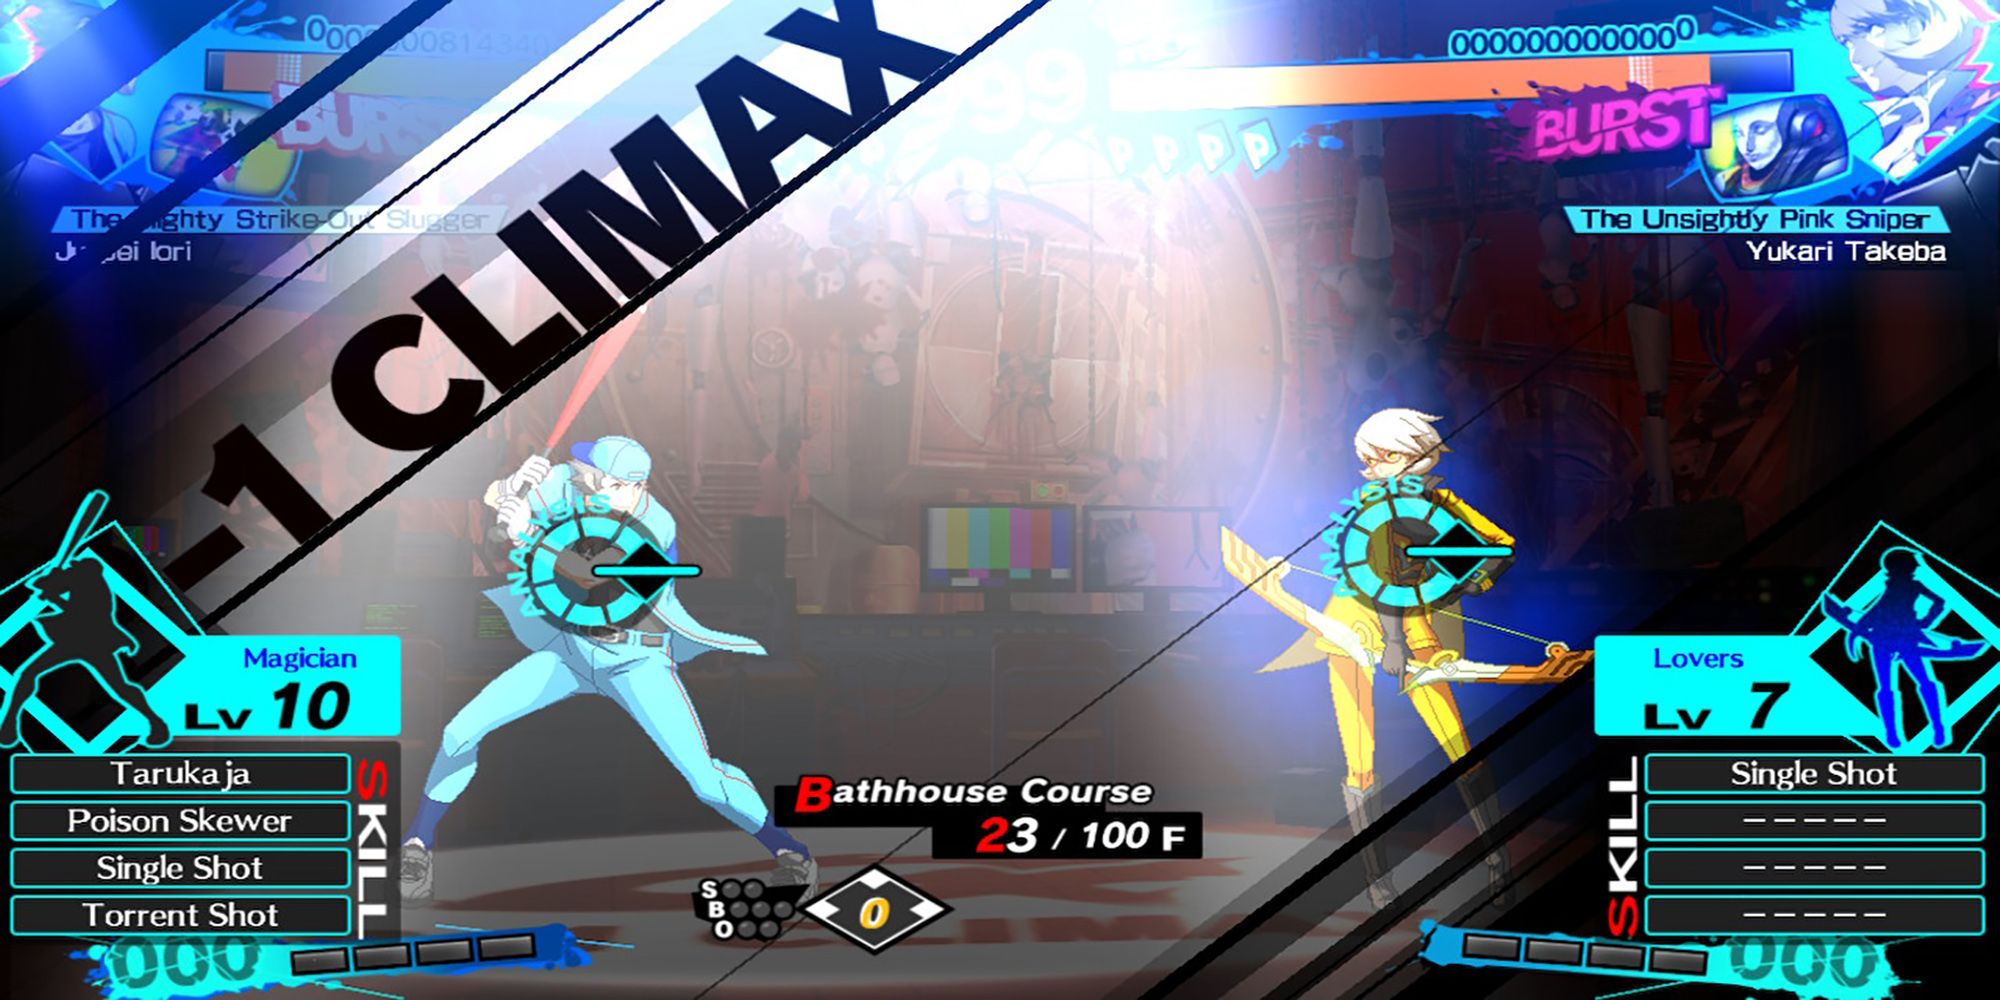 Junpei and Yukari get analyzed before a battle in the Shadow Realm during Golden Arena Mode. Persona 4 Arena Ultimax.